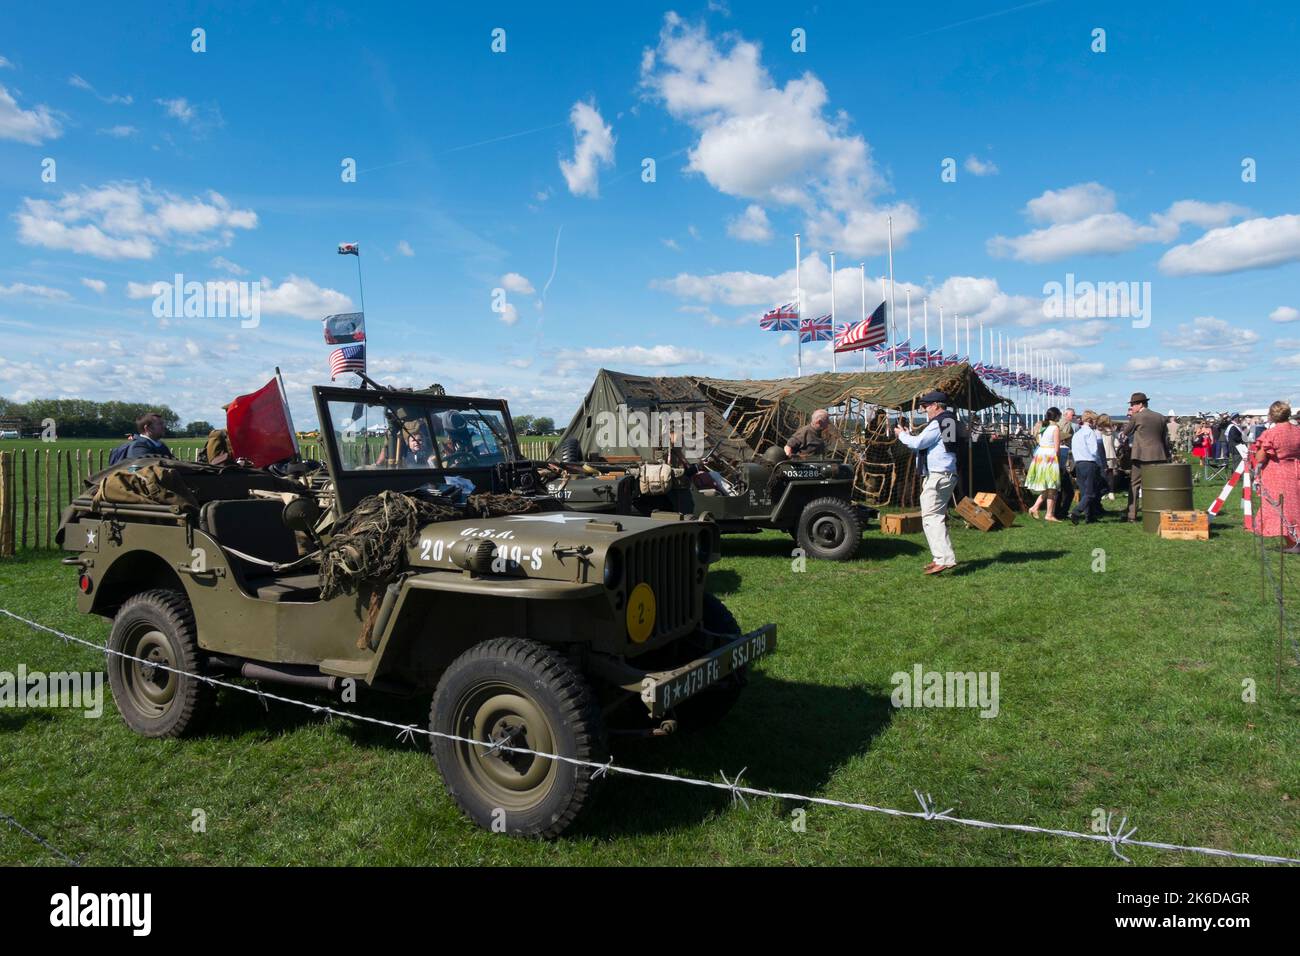 WW2 American Jeeps on display next to Union Jack and Stars and Stripes flags at half mast in respect of the Queen's death, BARC Revival, Goodwood, UK Stock Photo